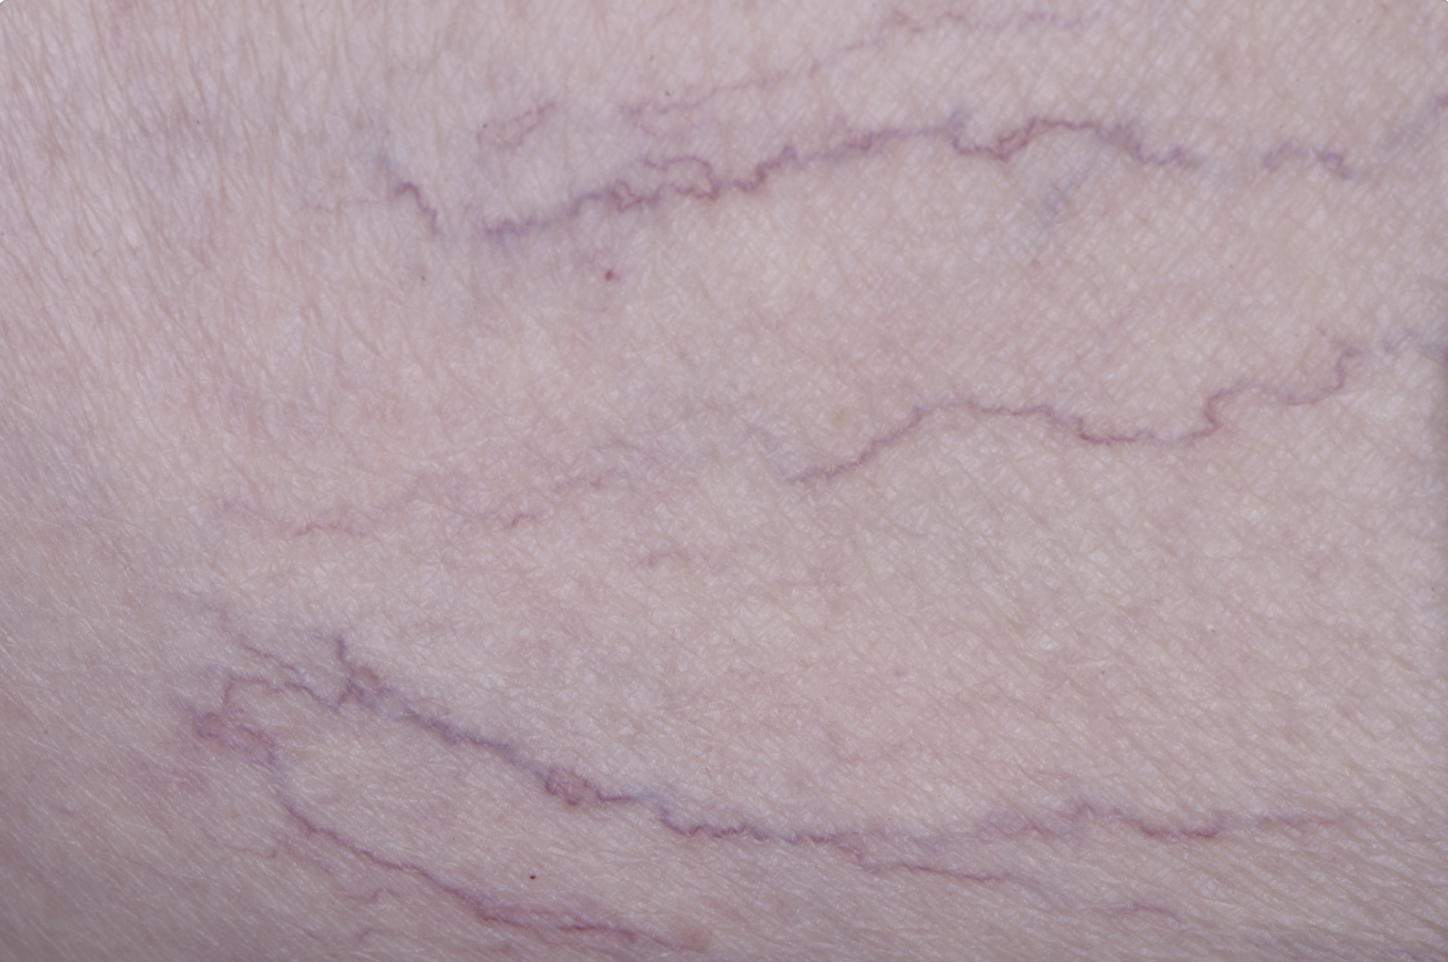 Thread (spider) veins vs. Varicose veins – what’s the difference?